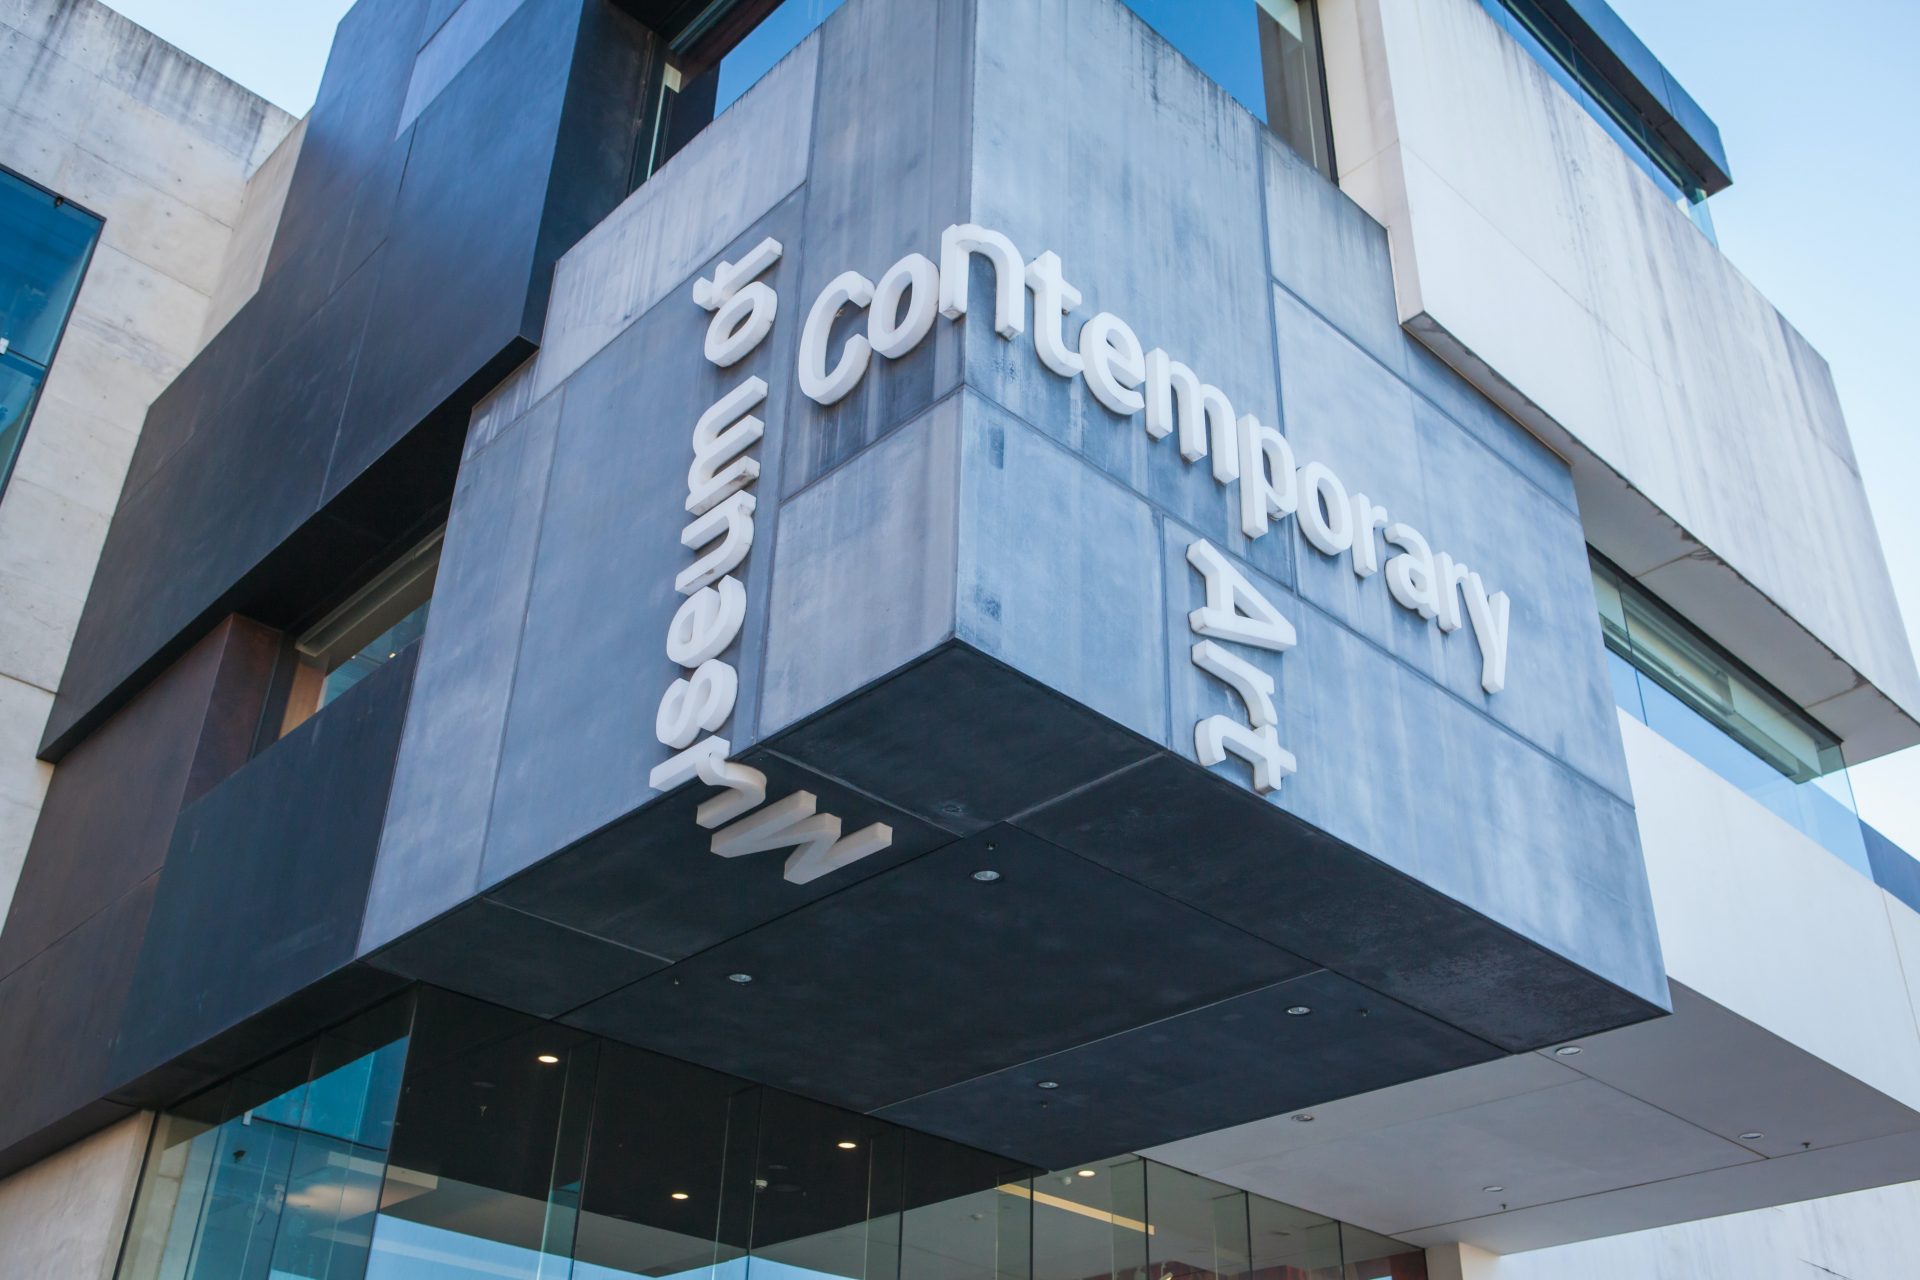 Visit Sydney Museum of Contemporary Art for a cultural experience in Sydney